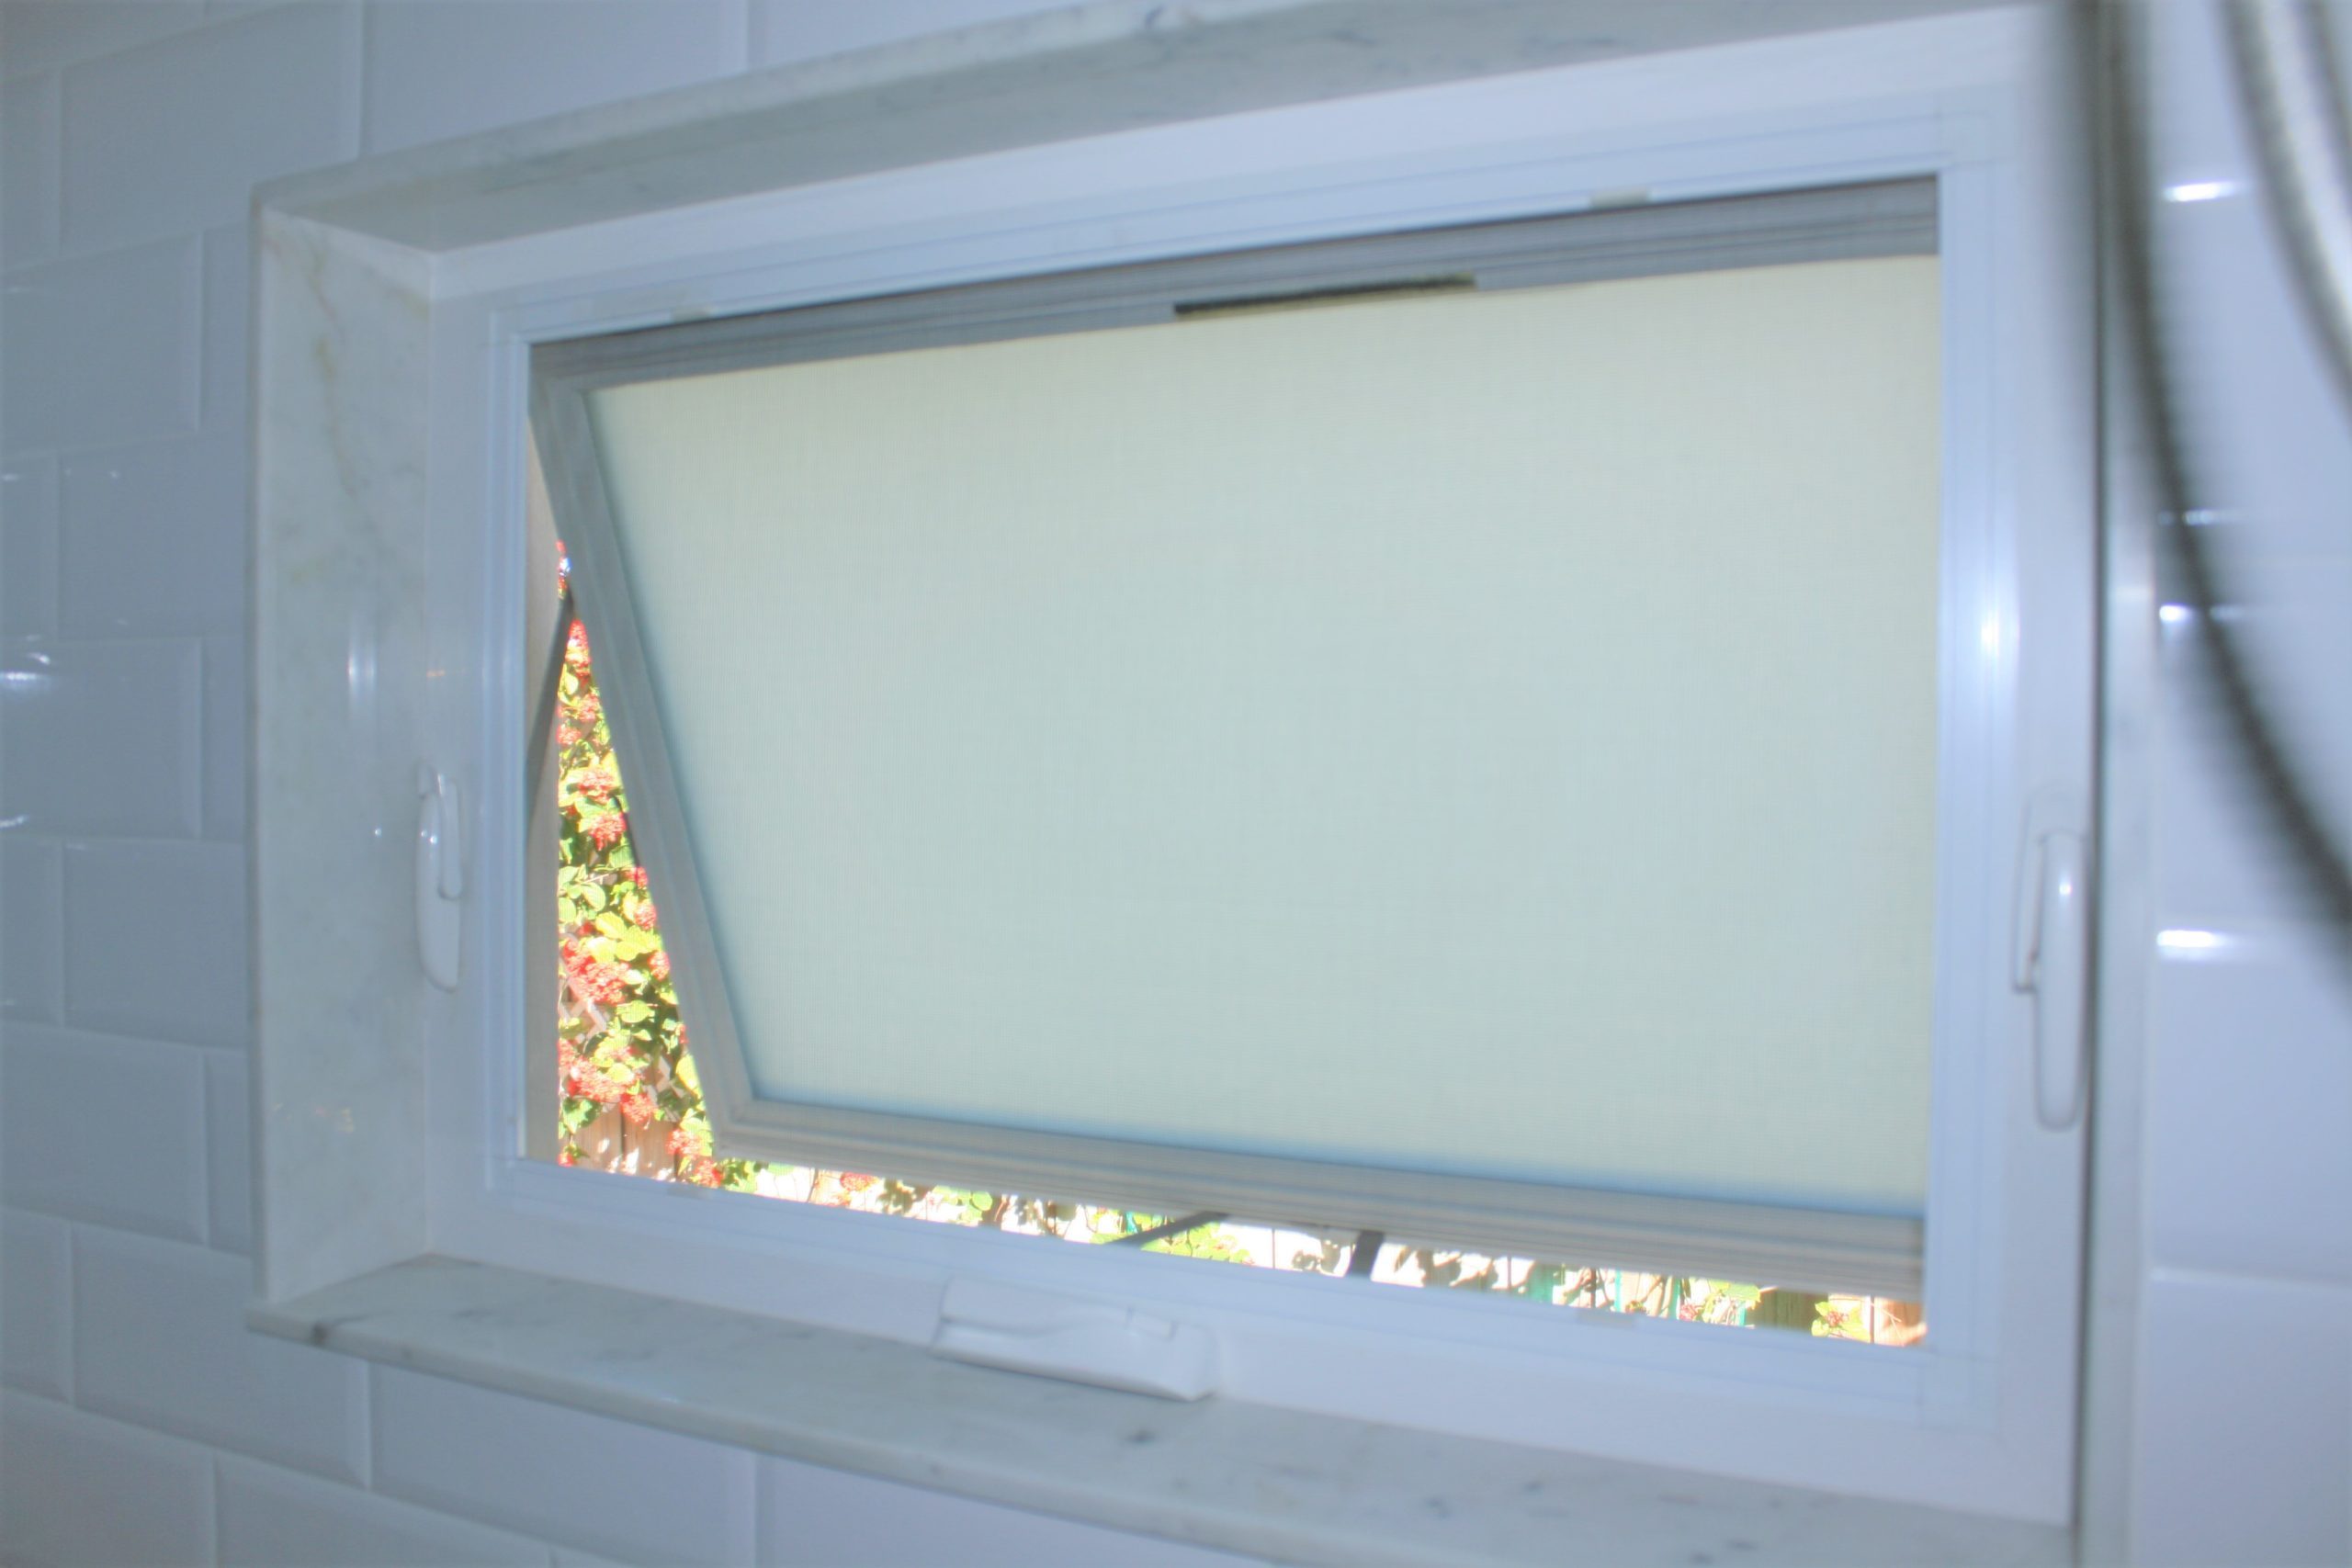 replacement windows in South Florida home